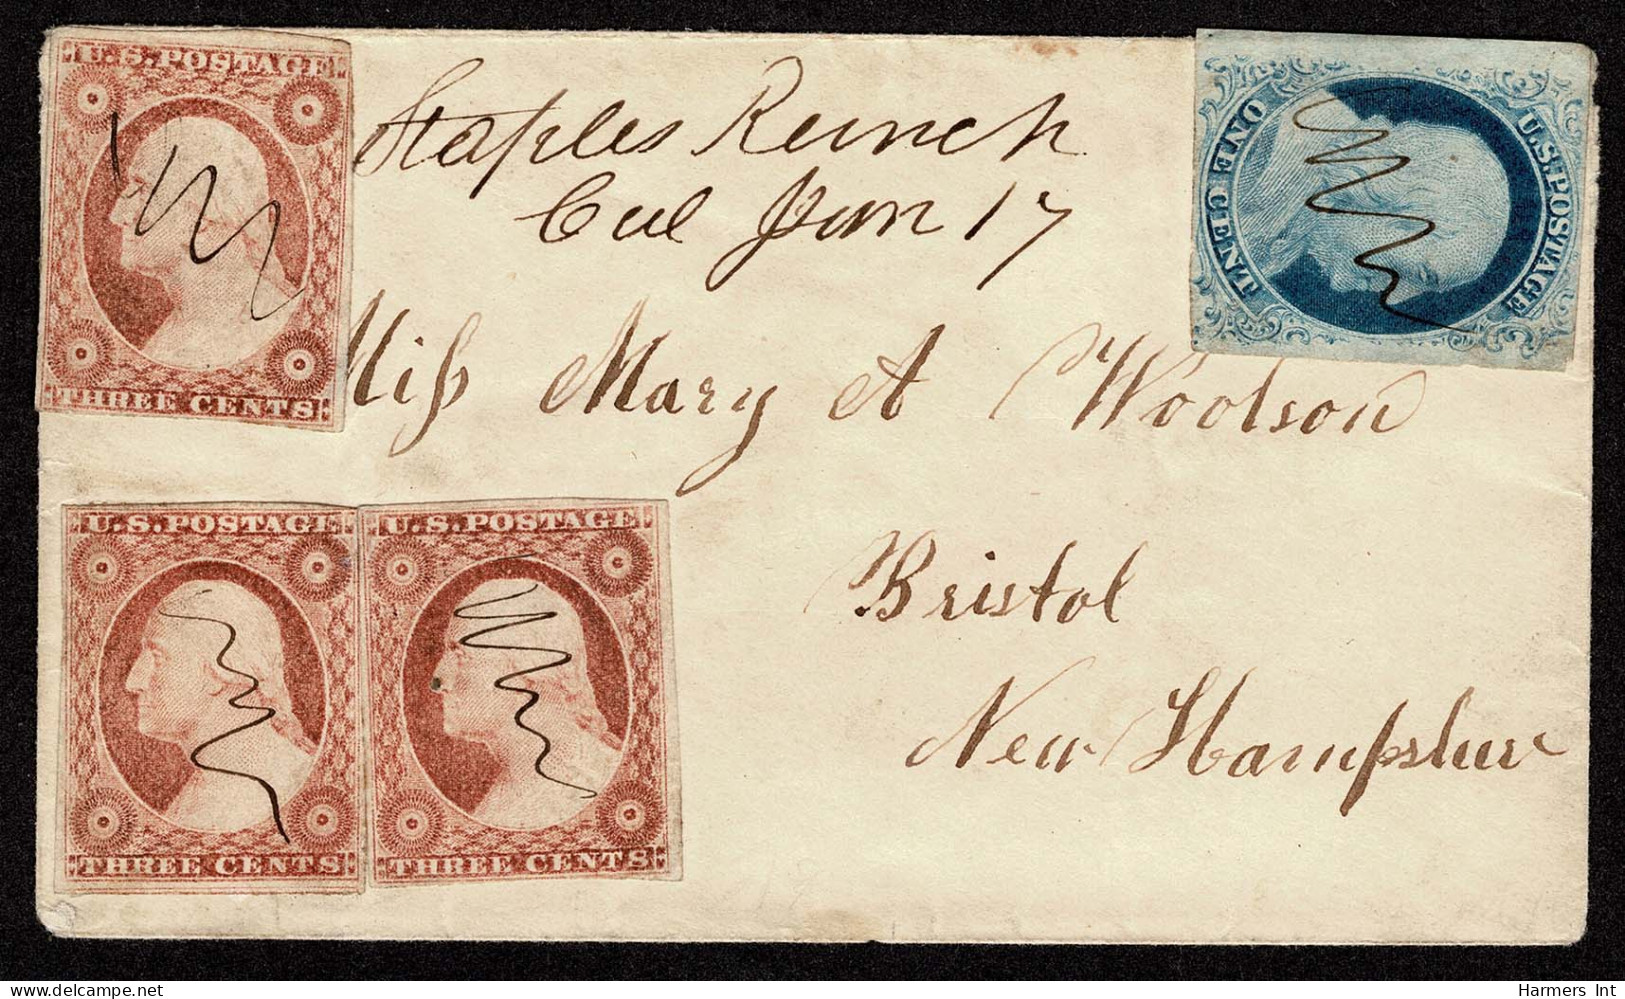 Lot # 025 1852, 3¢ Dull Red, Type II Three Copies And 1852, 1¢ Blue, Type IV - Covers & Documents